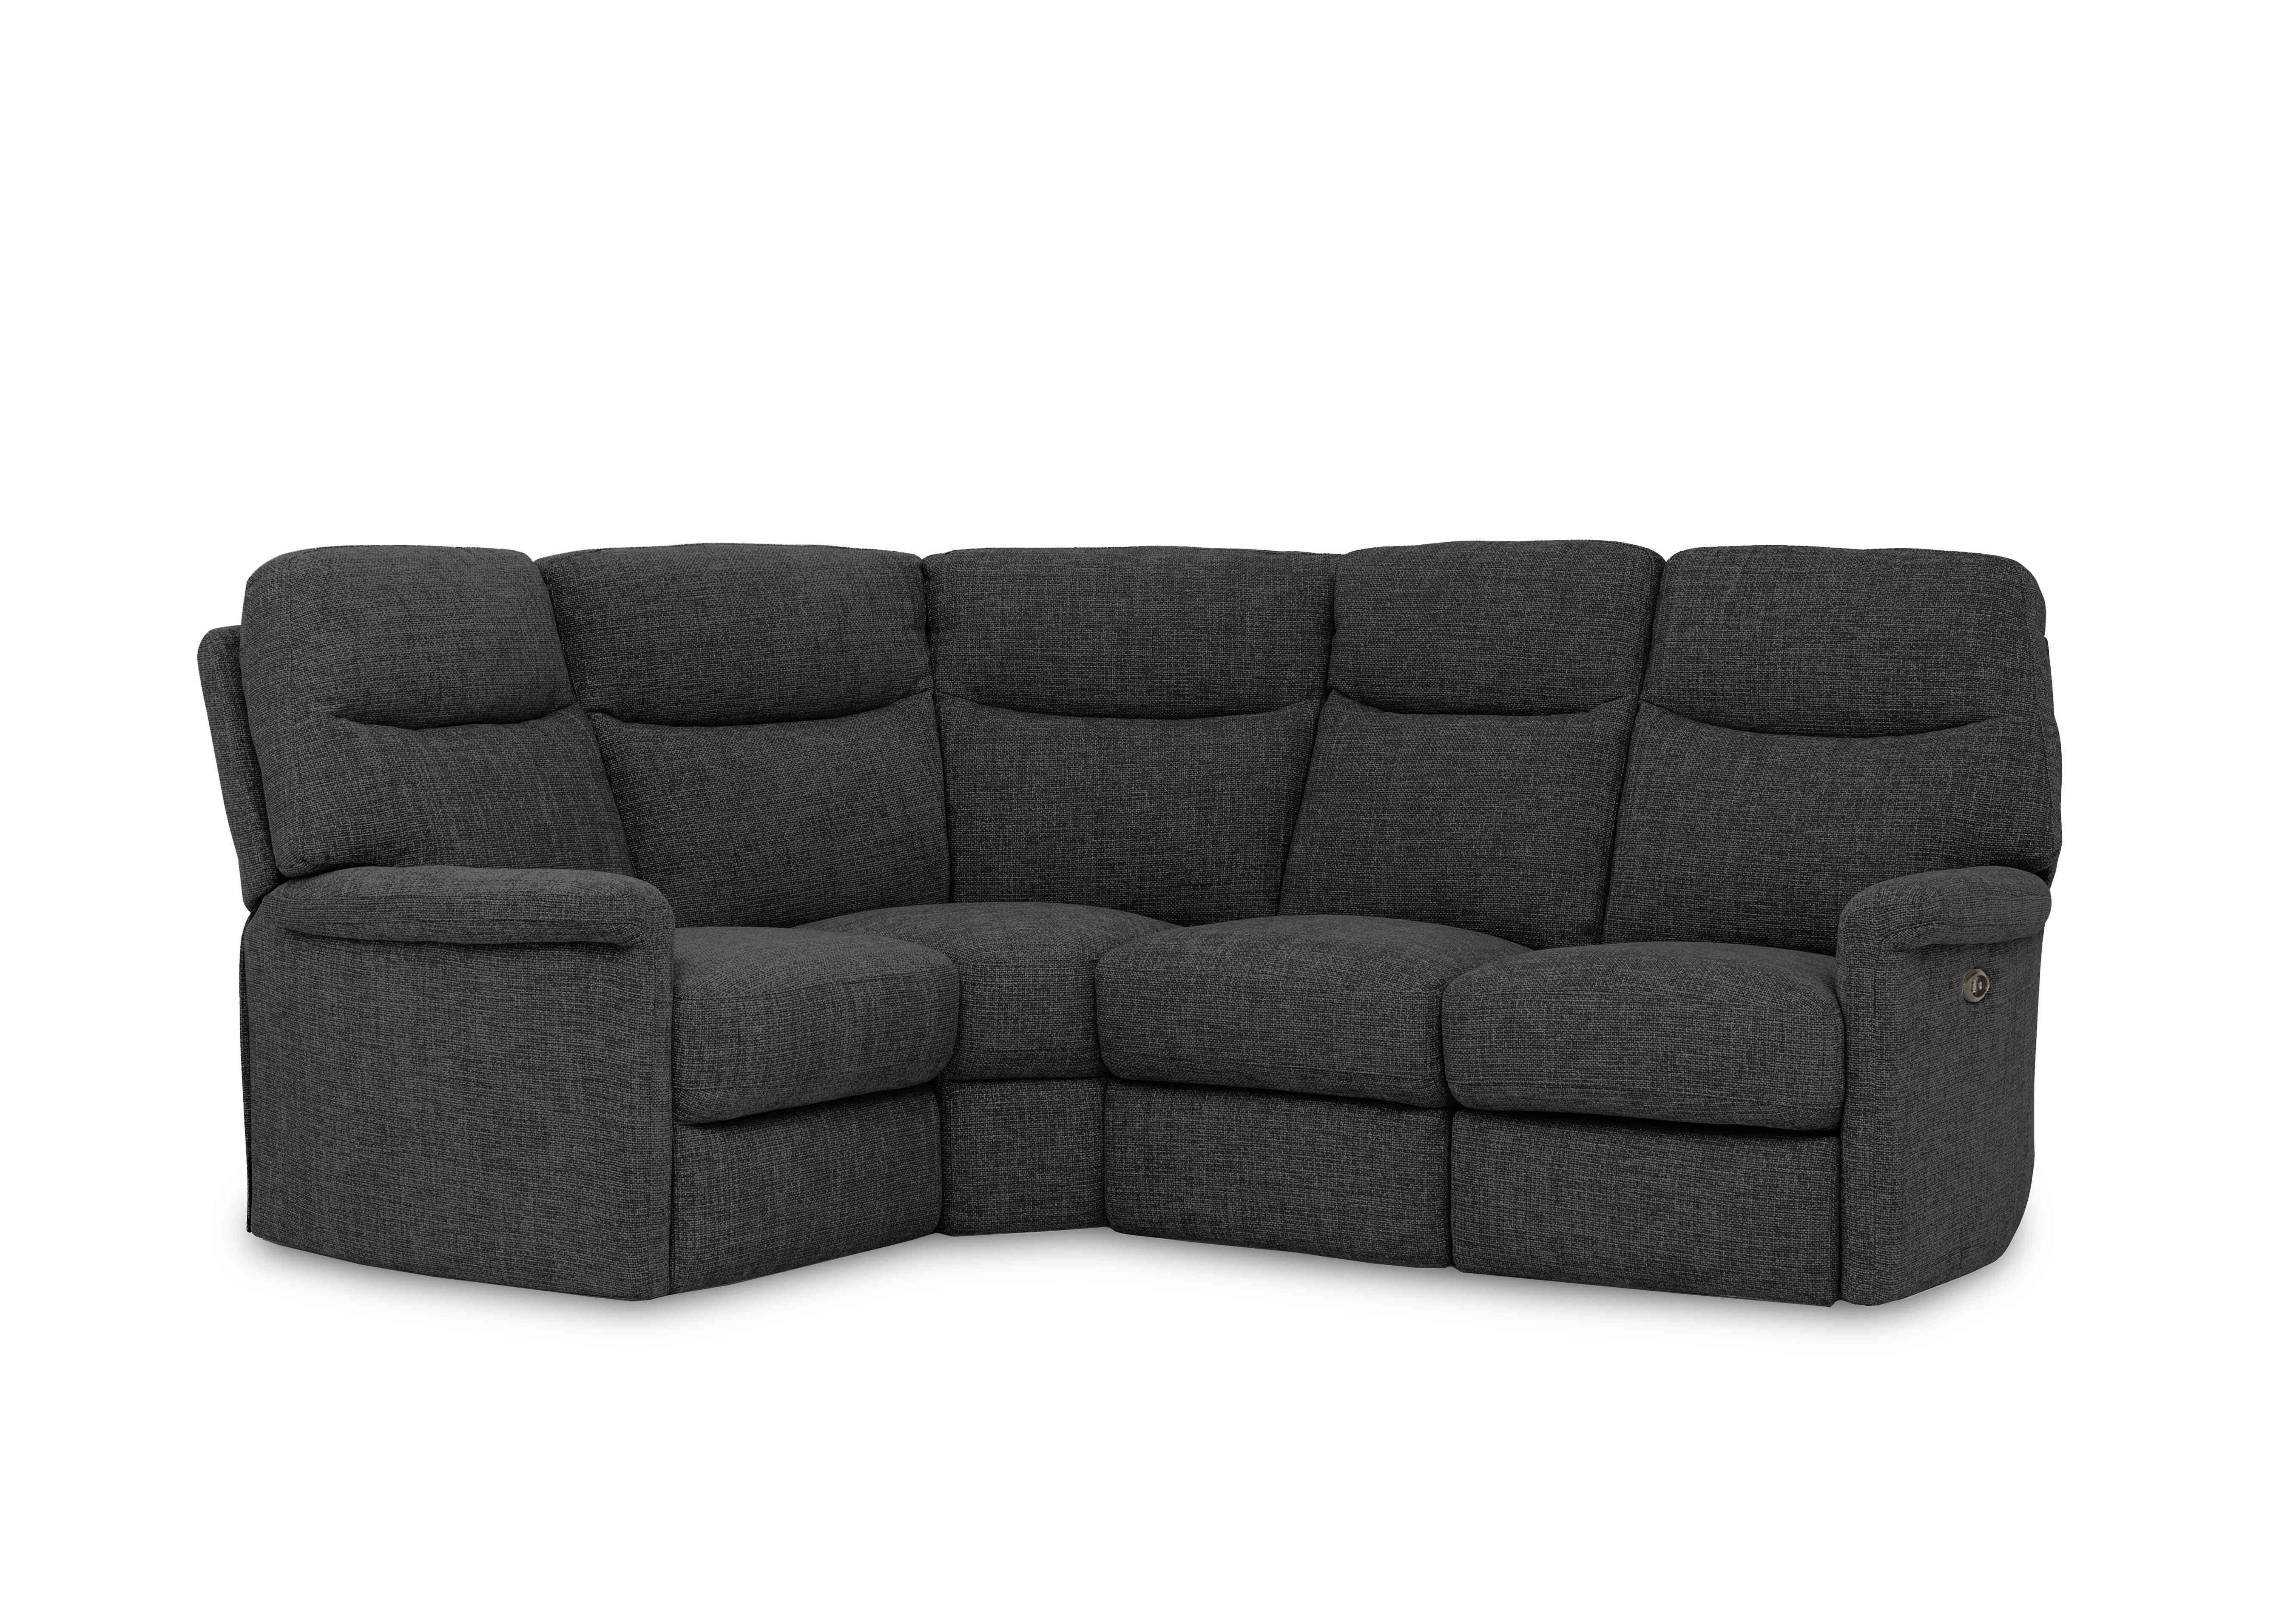 Compact Collection Lille Fabric Corner Sofa in Fab-Cac-R463 Black Mica on Furniture Village